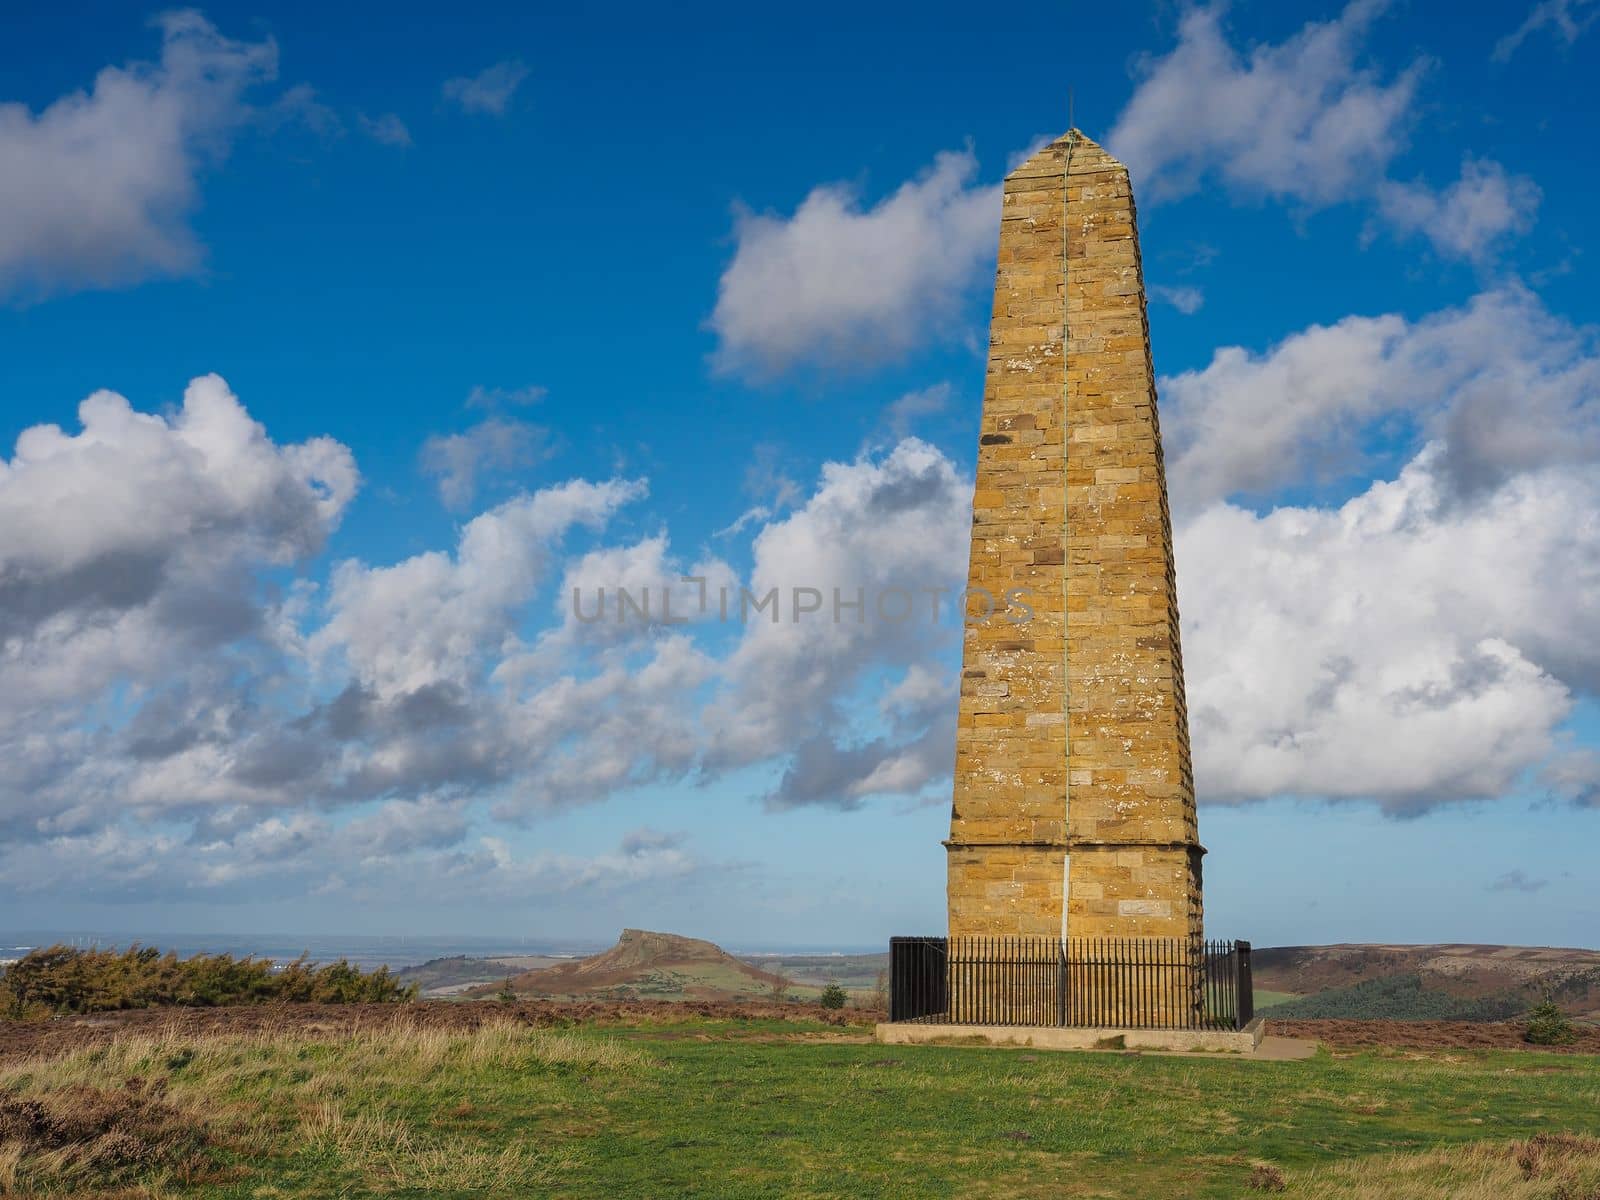 Captain Cooks Monument overlooking Roseberry Topping, North York Moors by PhilHarland